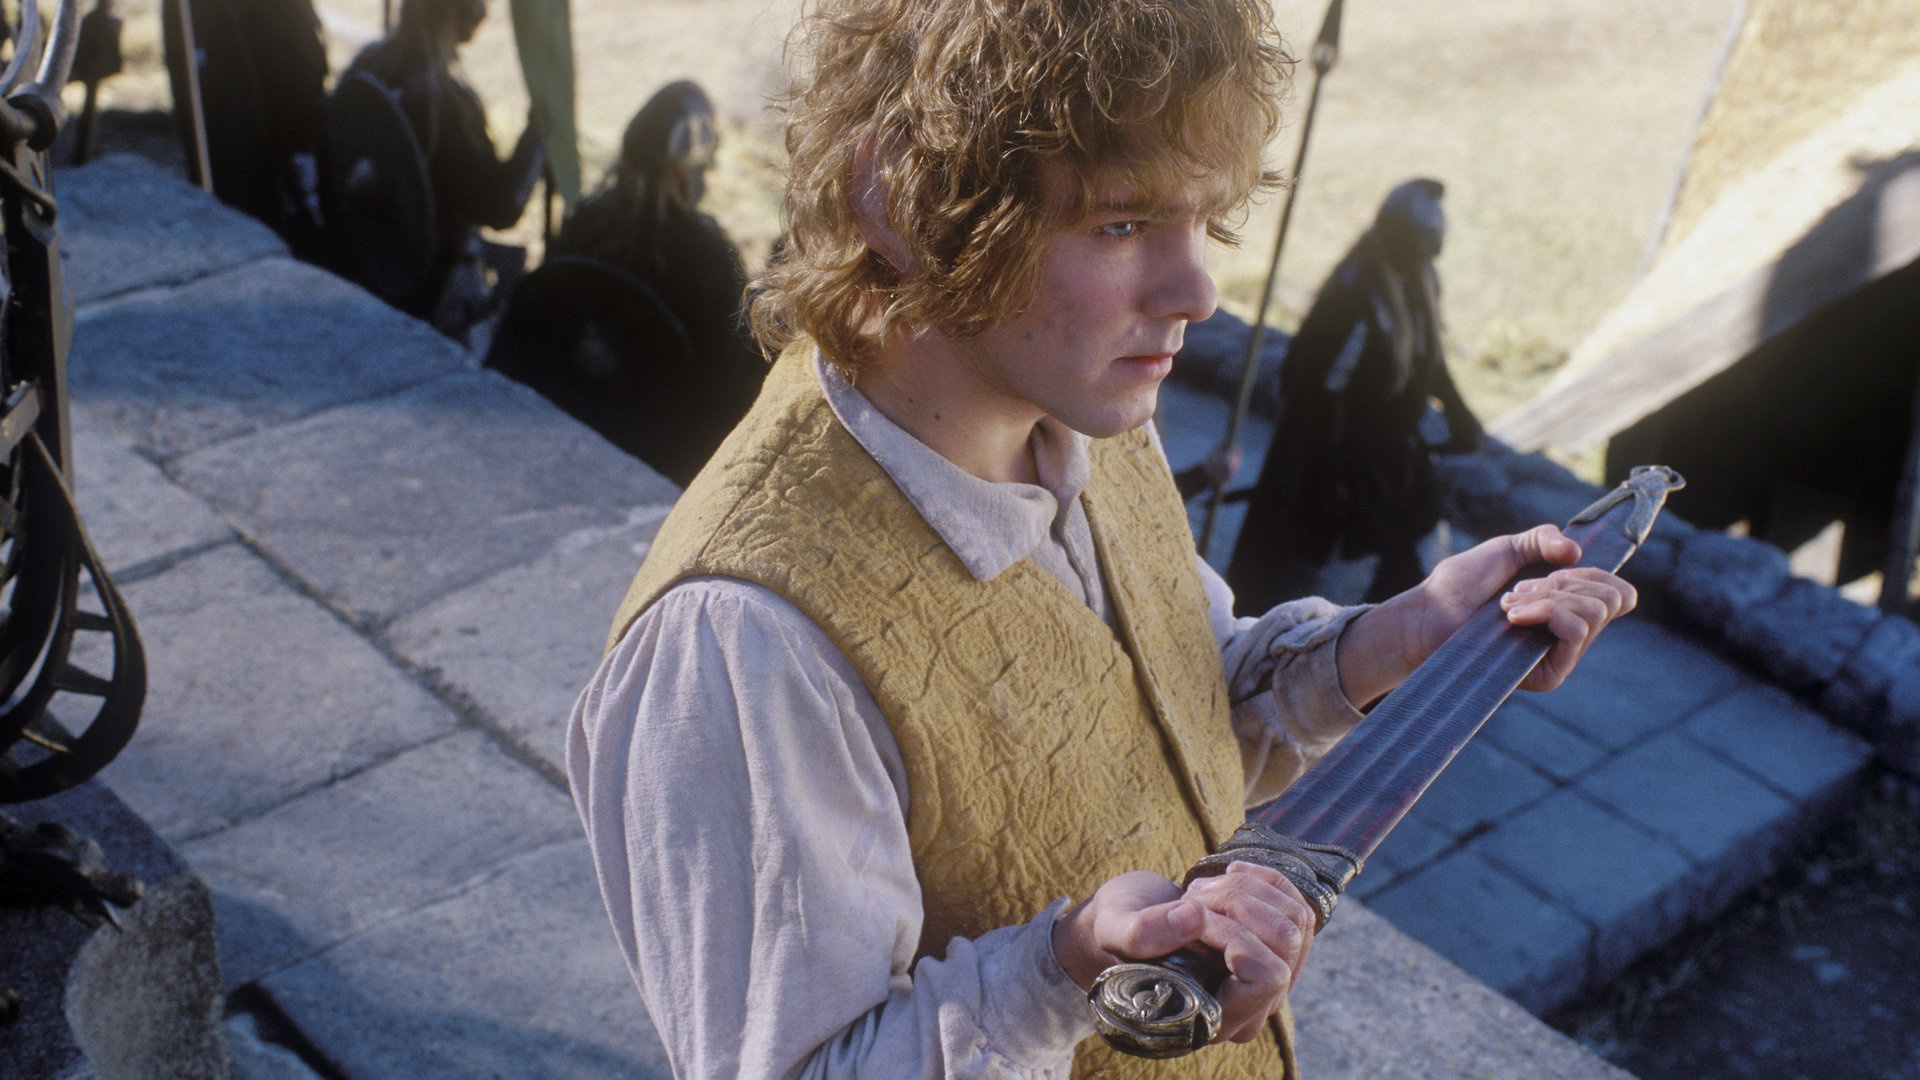 The Return of the King: Dominic Monaghan as Meriadoc Brandybuck, An esquire of Rohan. 1920x1080 Full HD Wallpaper.